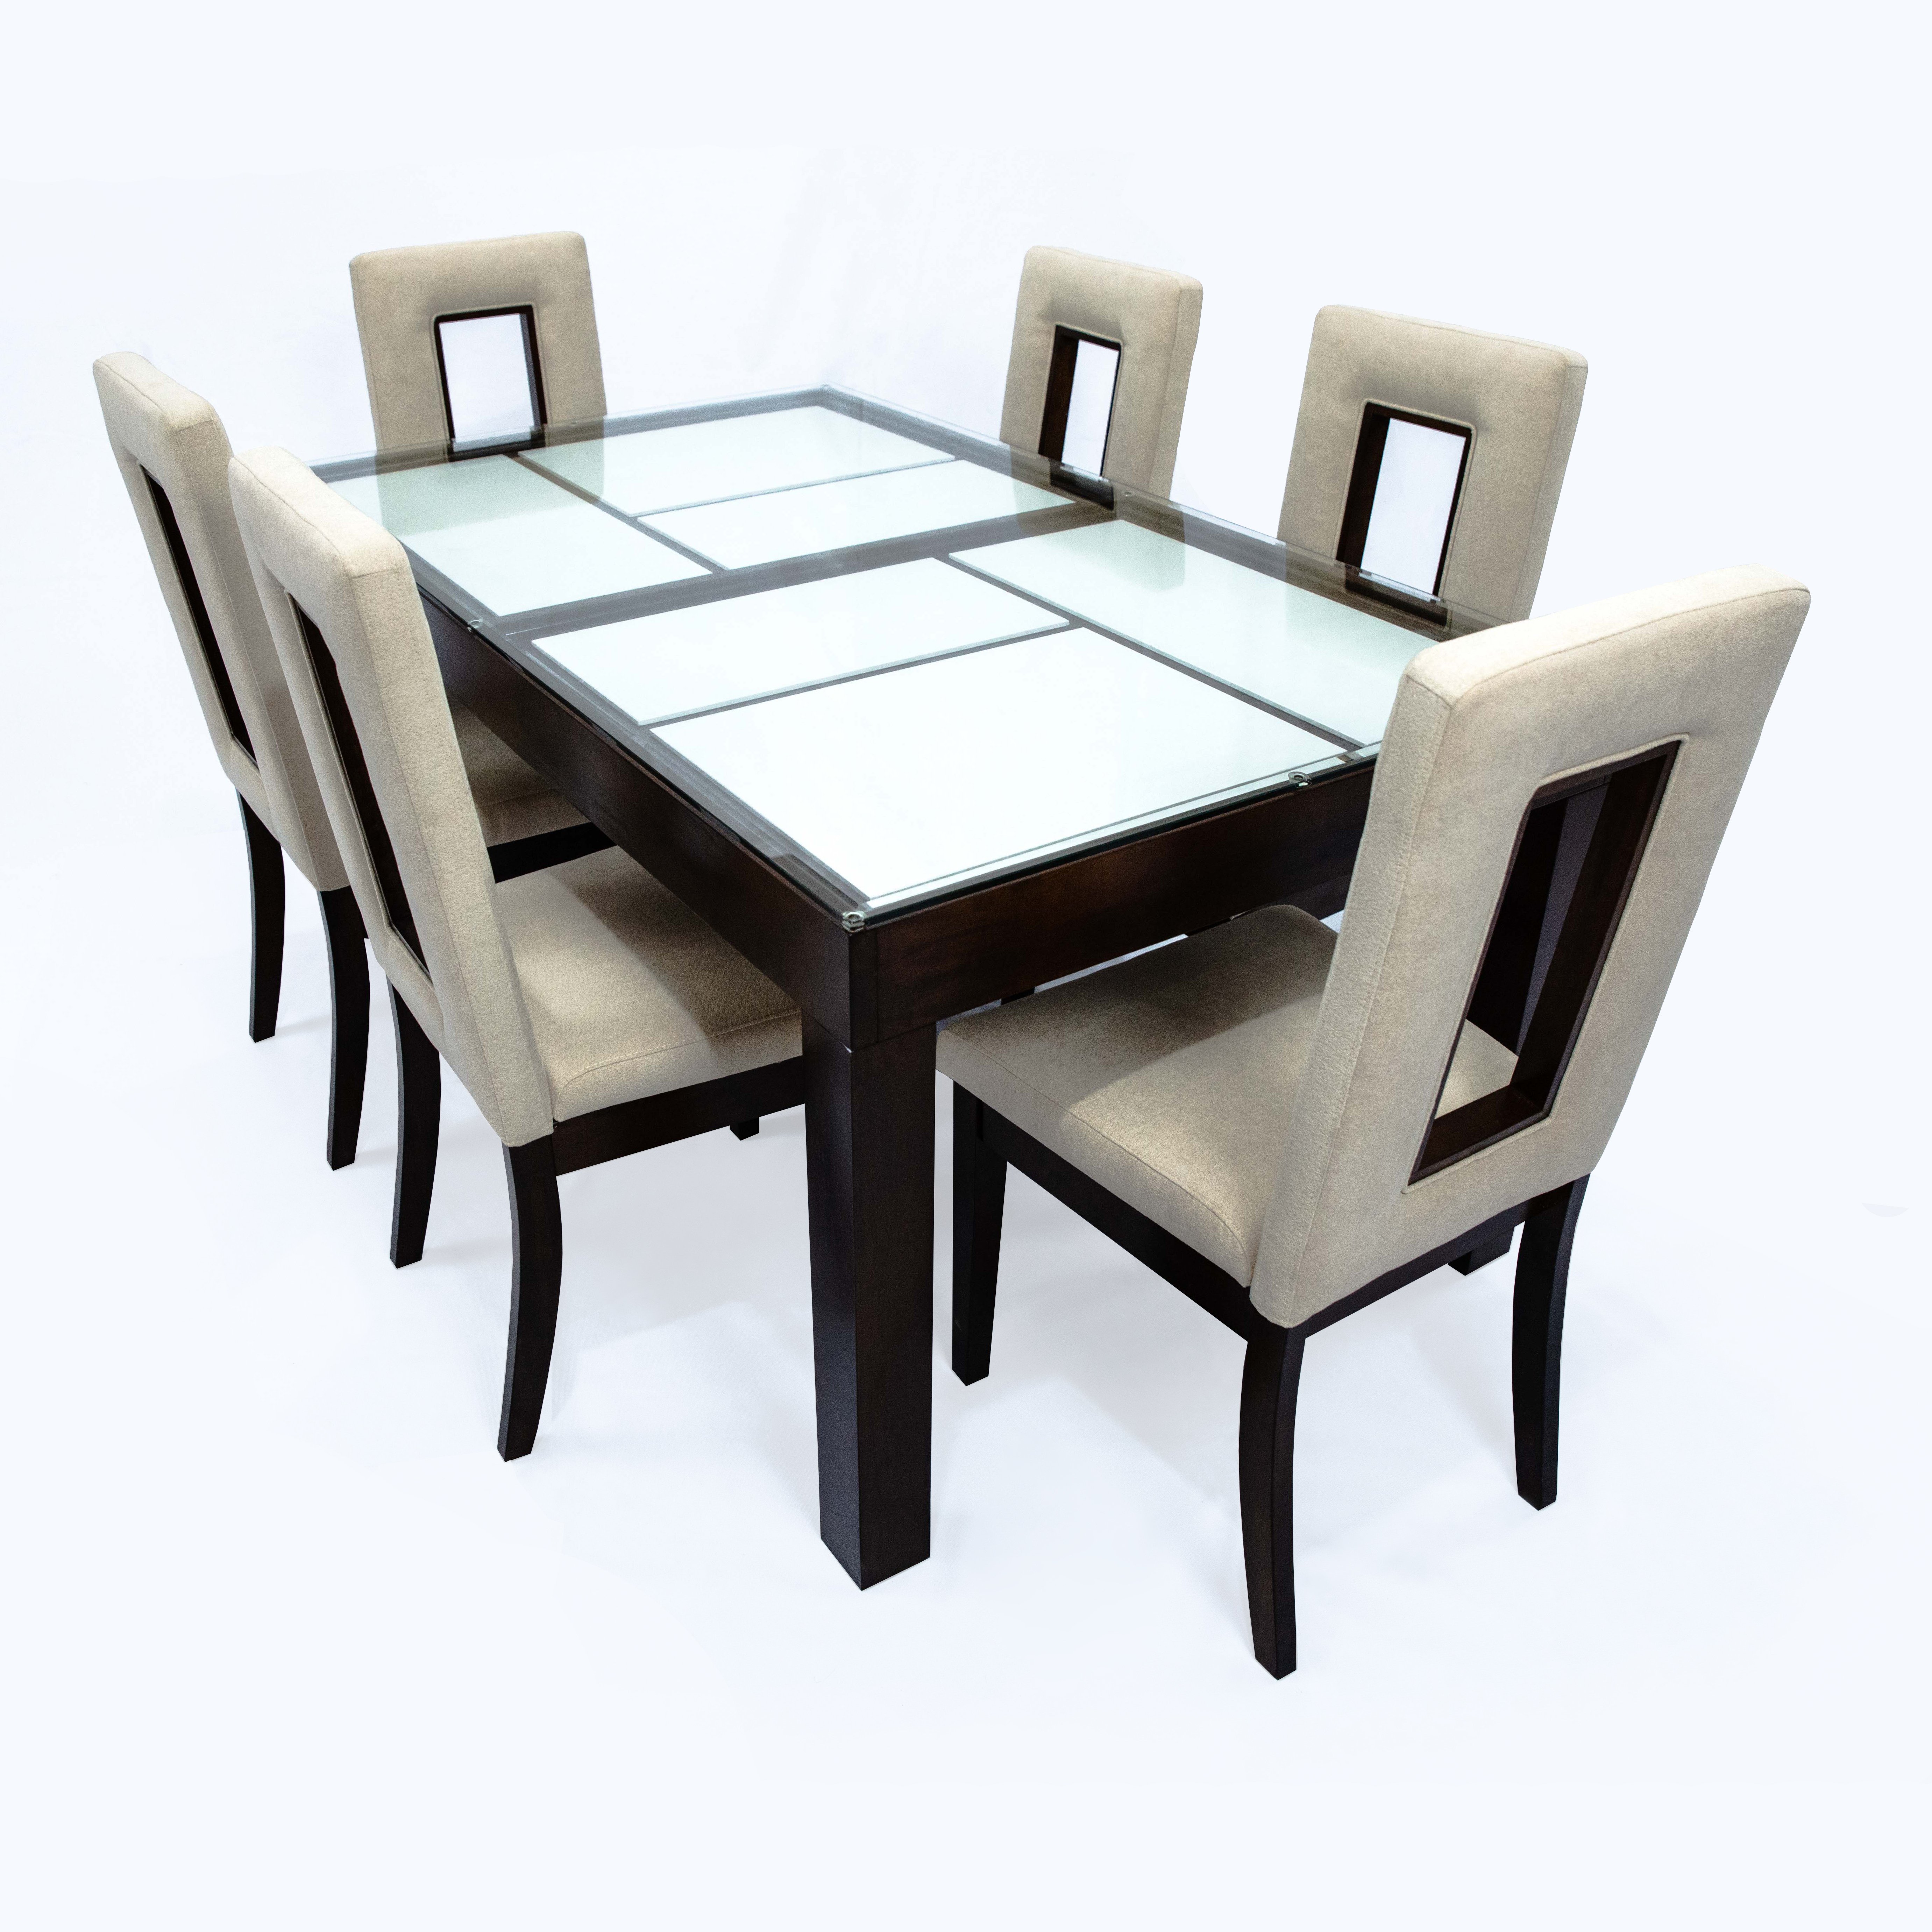 6 Seater Dining Table Trystan Home Style Depot